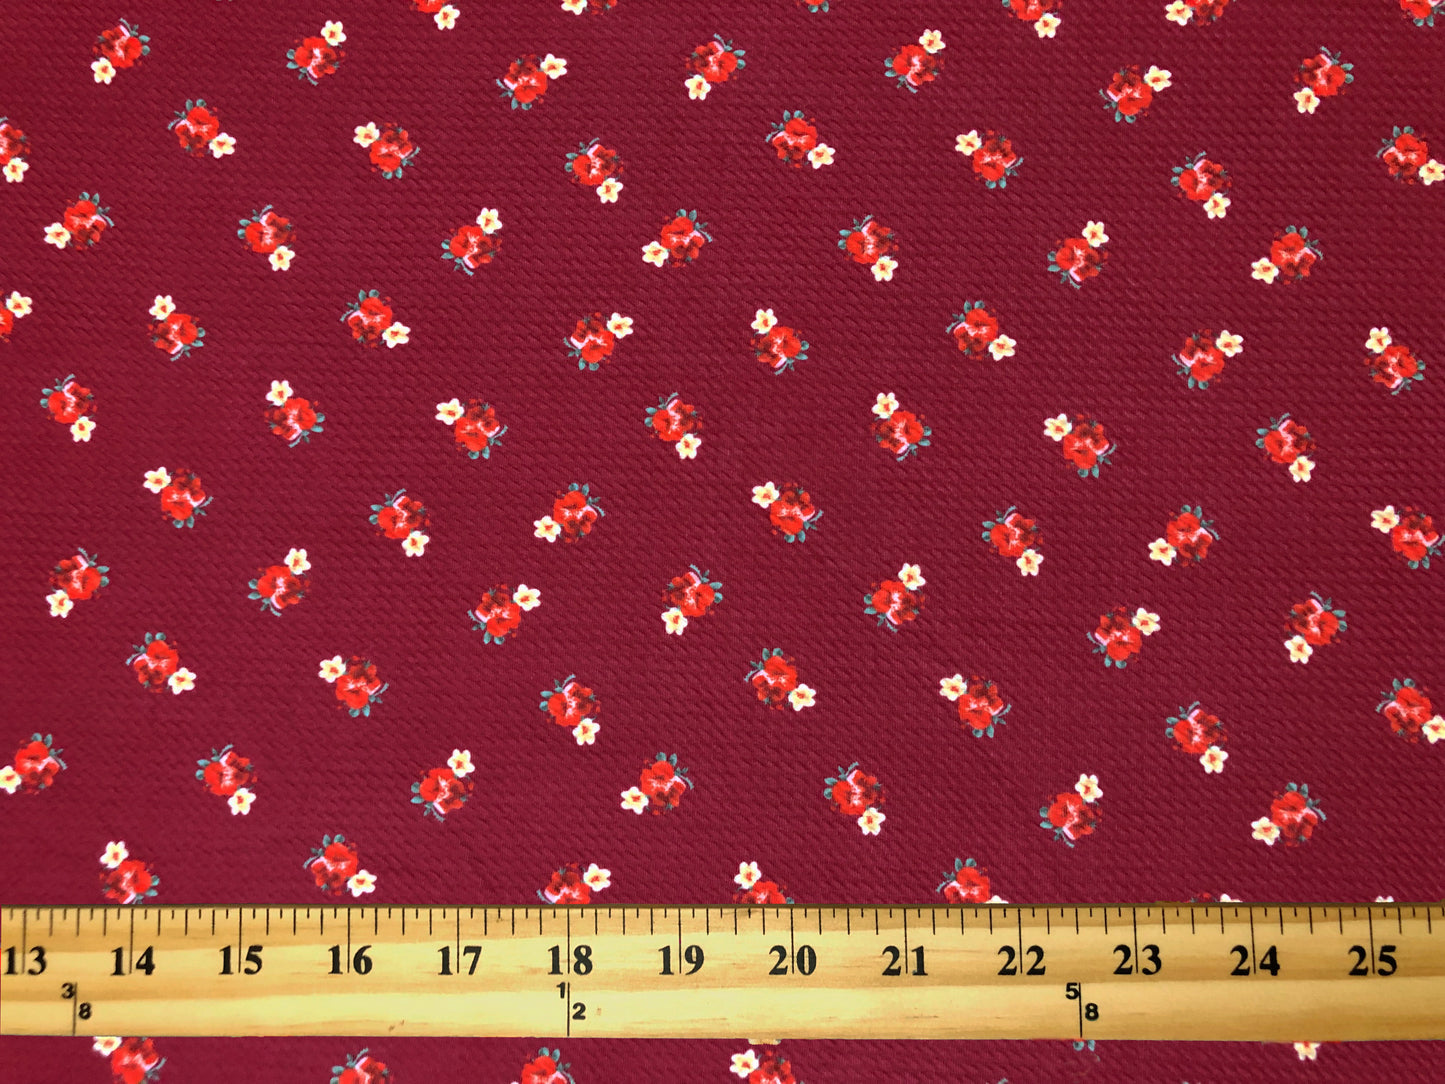 Bullet Knit Printed Fabric-Burgundy Red Roses-BPR258-Sold by the Yard